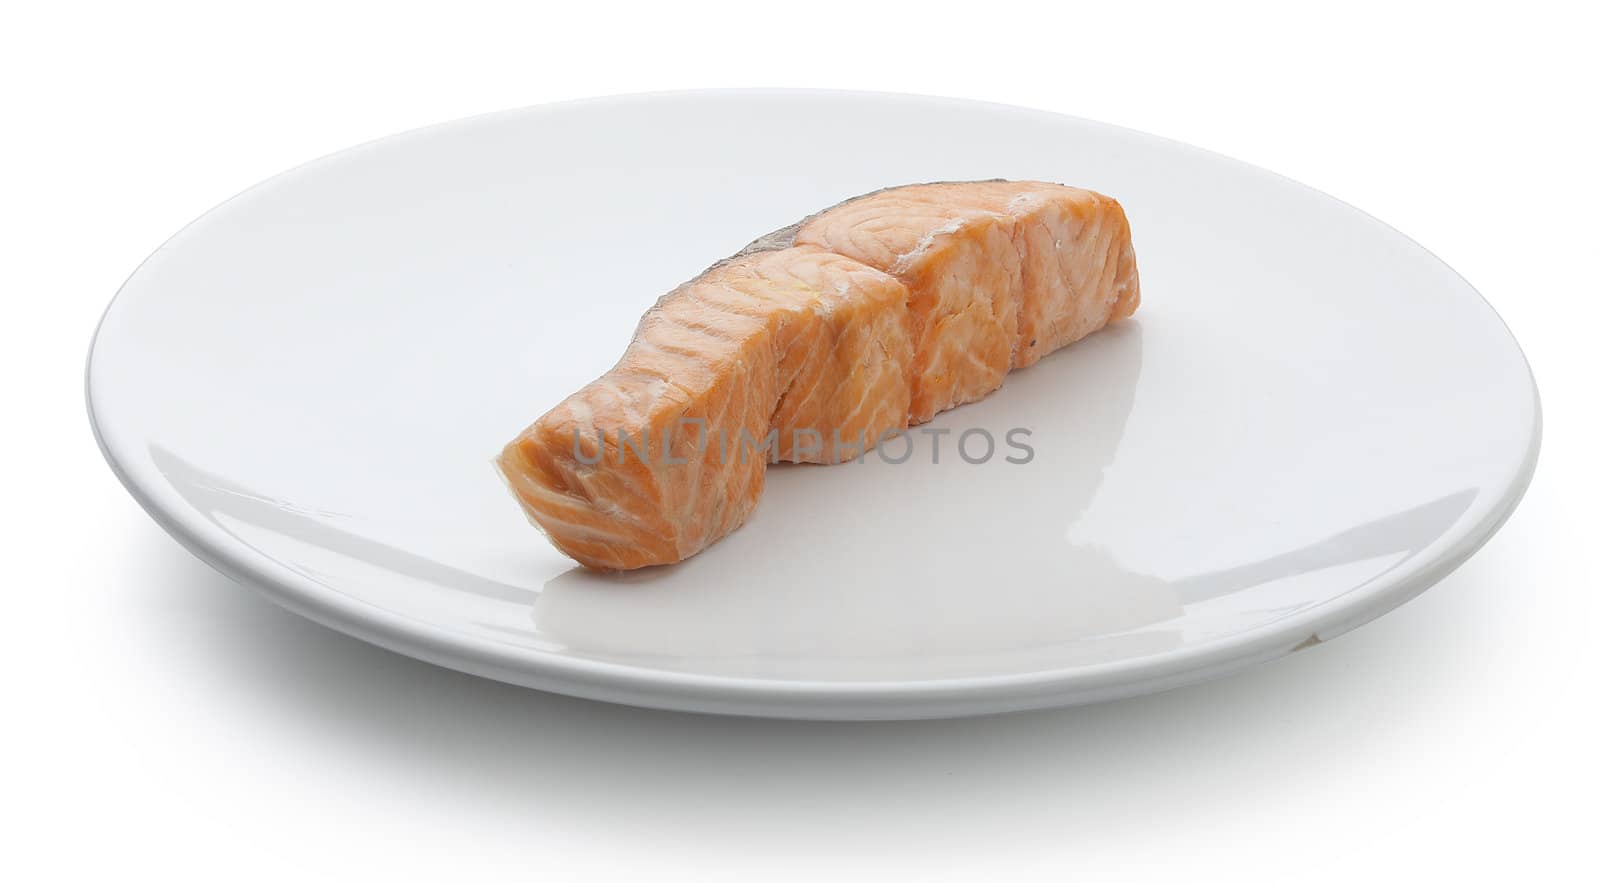 Steamed salmon by Angorius